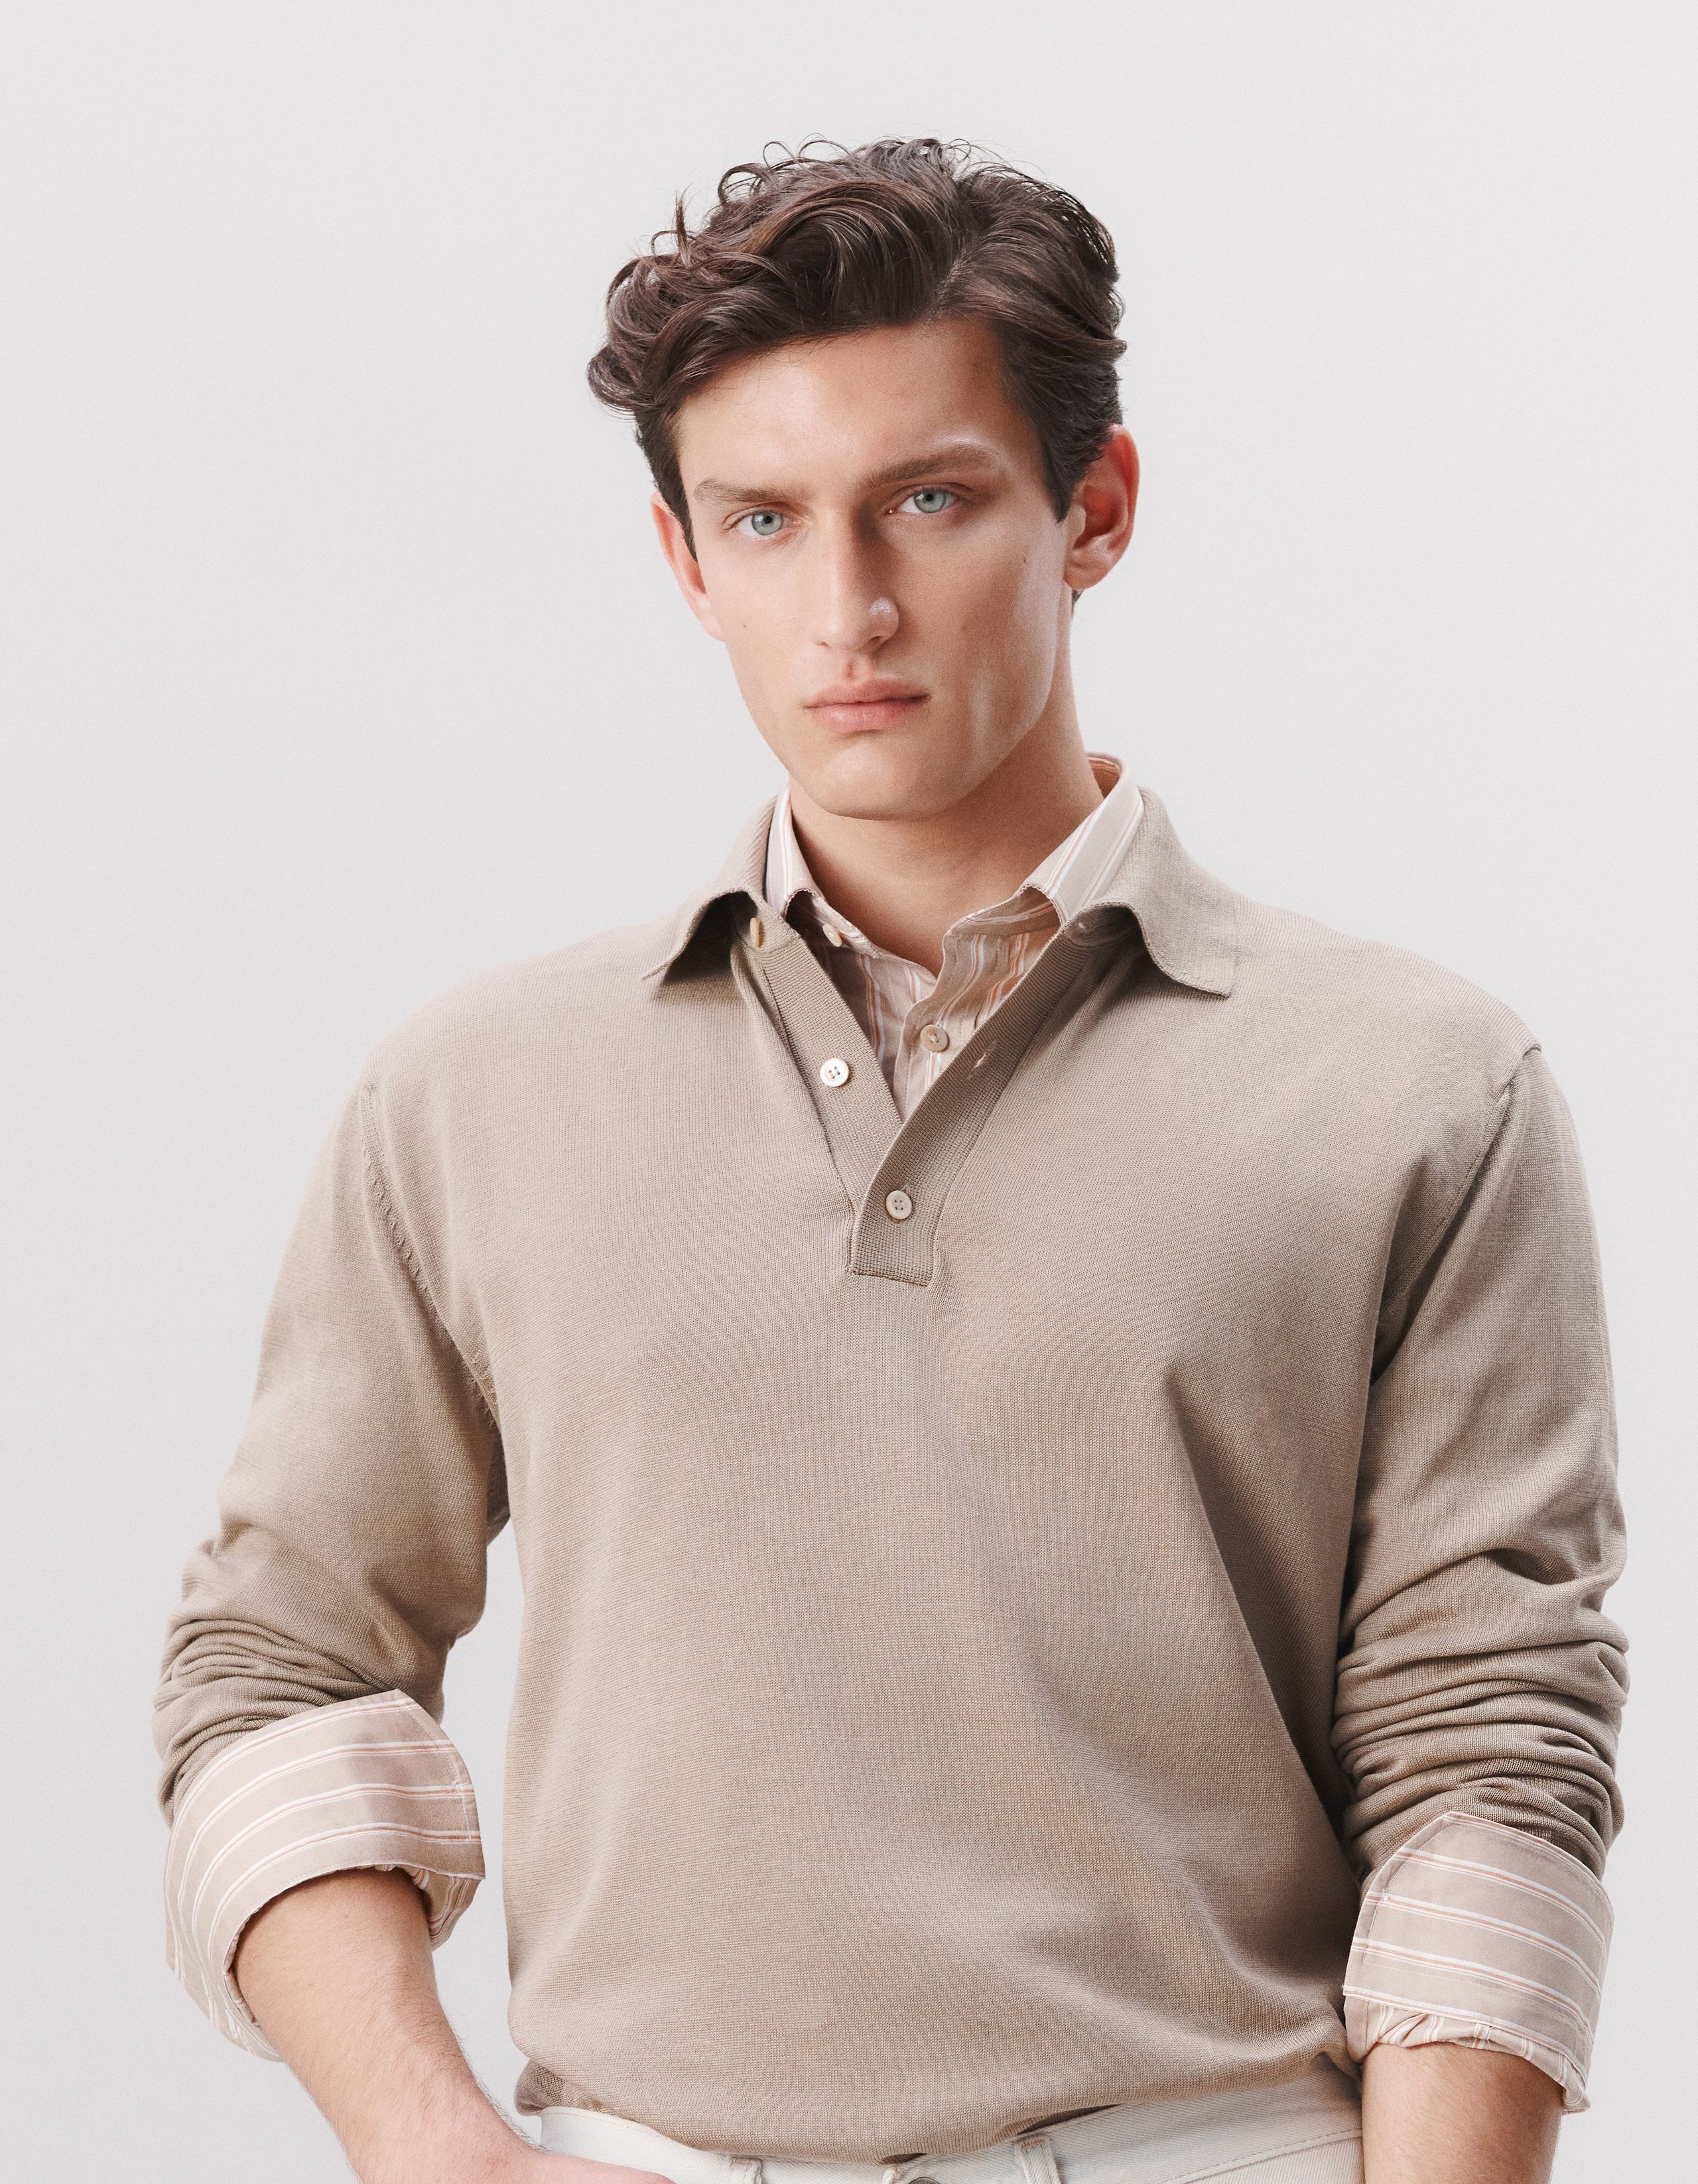 A man wears a shirt layered with a long sleeve polo shirt on top